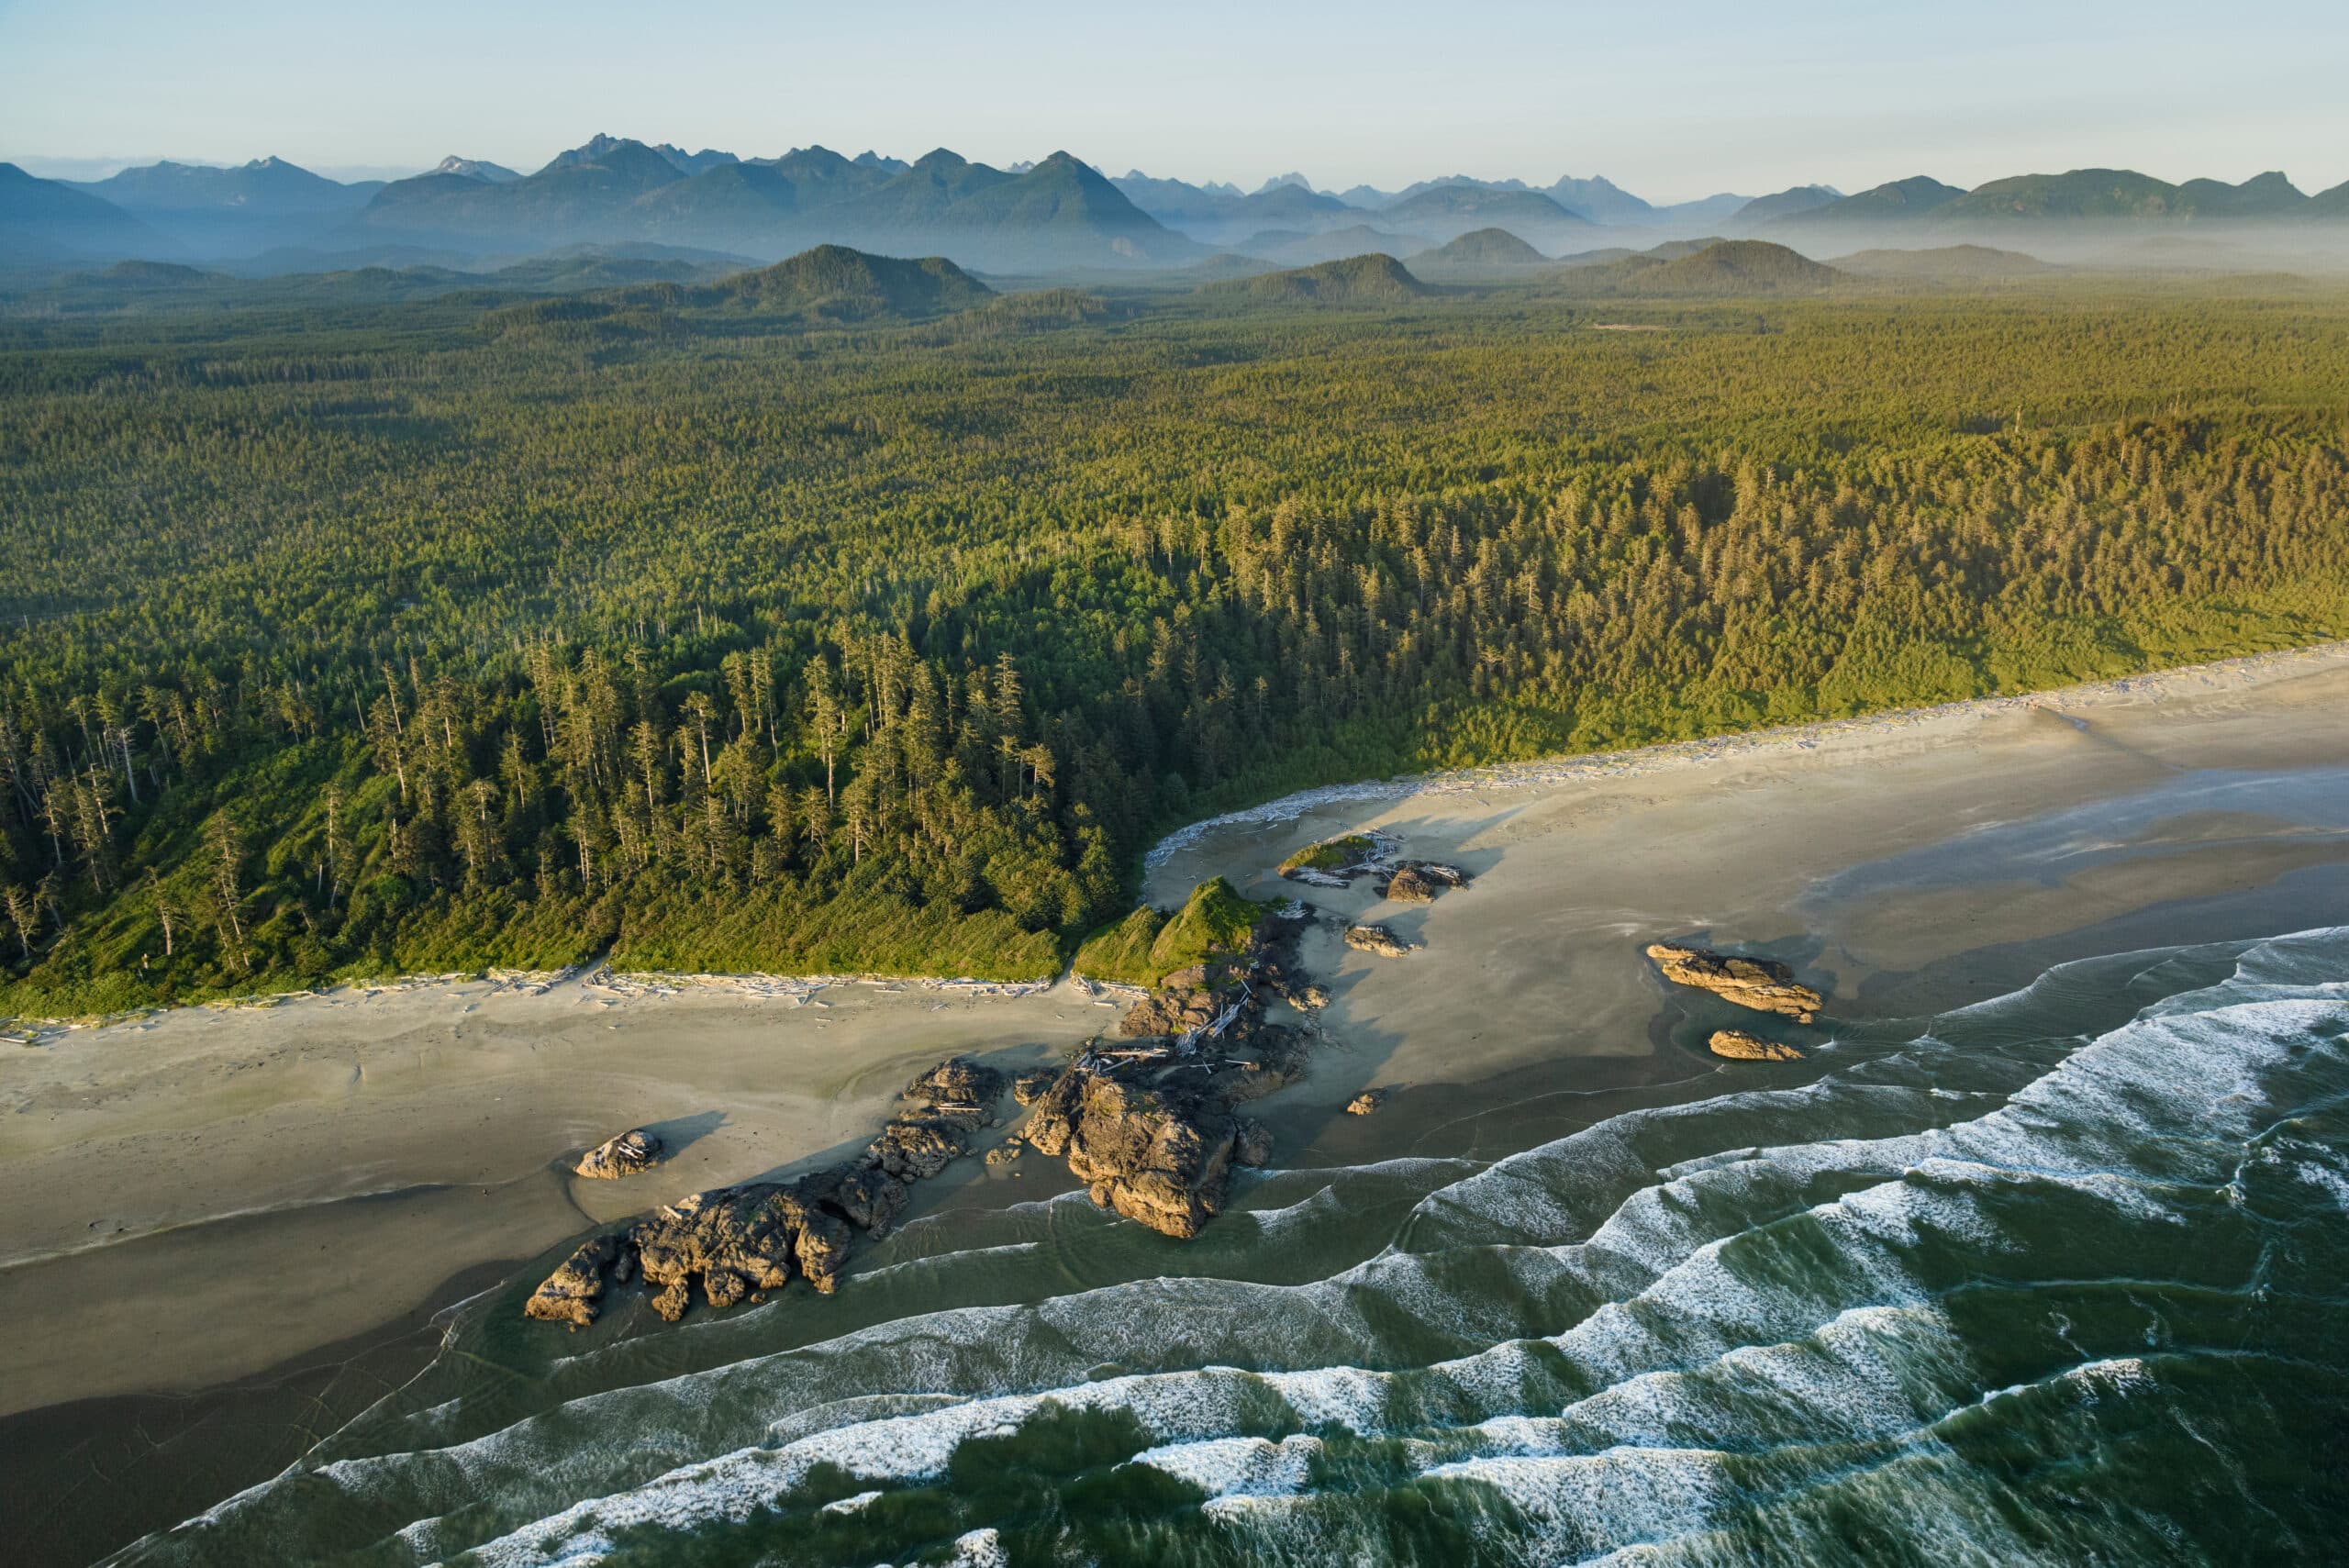 <p><span>Clayoquot Wilderness Resort, located in the heart of the Clayoquot Sound Biosphere Reserve, marries luxury with the ruggedness of the Canadian wilderness. Accessible only by seaplane, this eco-safari resort offers extravagantly furnished tents and a range of outdoor activities like kayaking, horseback riding, and wildlife watching.</span></p> <p><span>The resort’s commitment to sustainability and conservation enhances the adventure, making it both luxurious and responsible. Dining here is a farm-to-table experience, with organic ingredients sourced locally.</span></p> <p><b>Insider’s Tip: </b><span>Book a heli-adventure for a breathtaking aerial view of the unspoiled wilderness.</span></p> <p><b>When To Travel: </b><span>The resort is open from May to September, the best time to enjoy the outdoor activities.</span></p> <p><b>How To Get There: </b><span>Access is via a scenic 45-minute seaplane flight from Vancouver.</span></p>